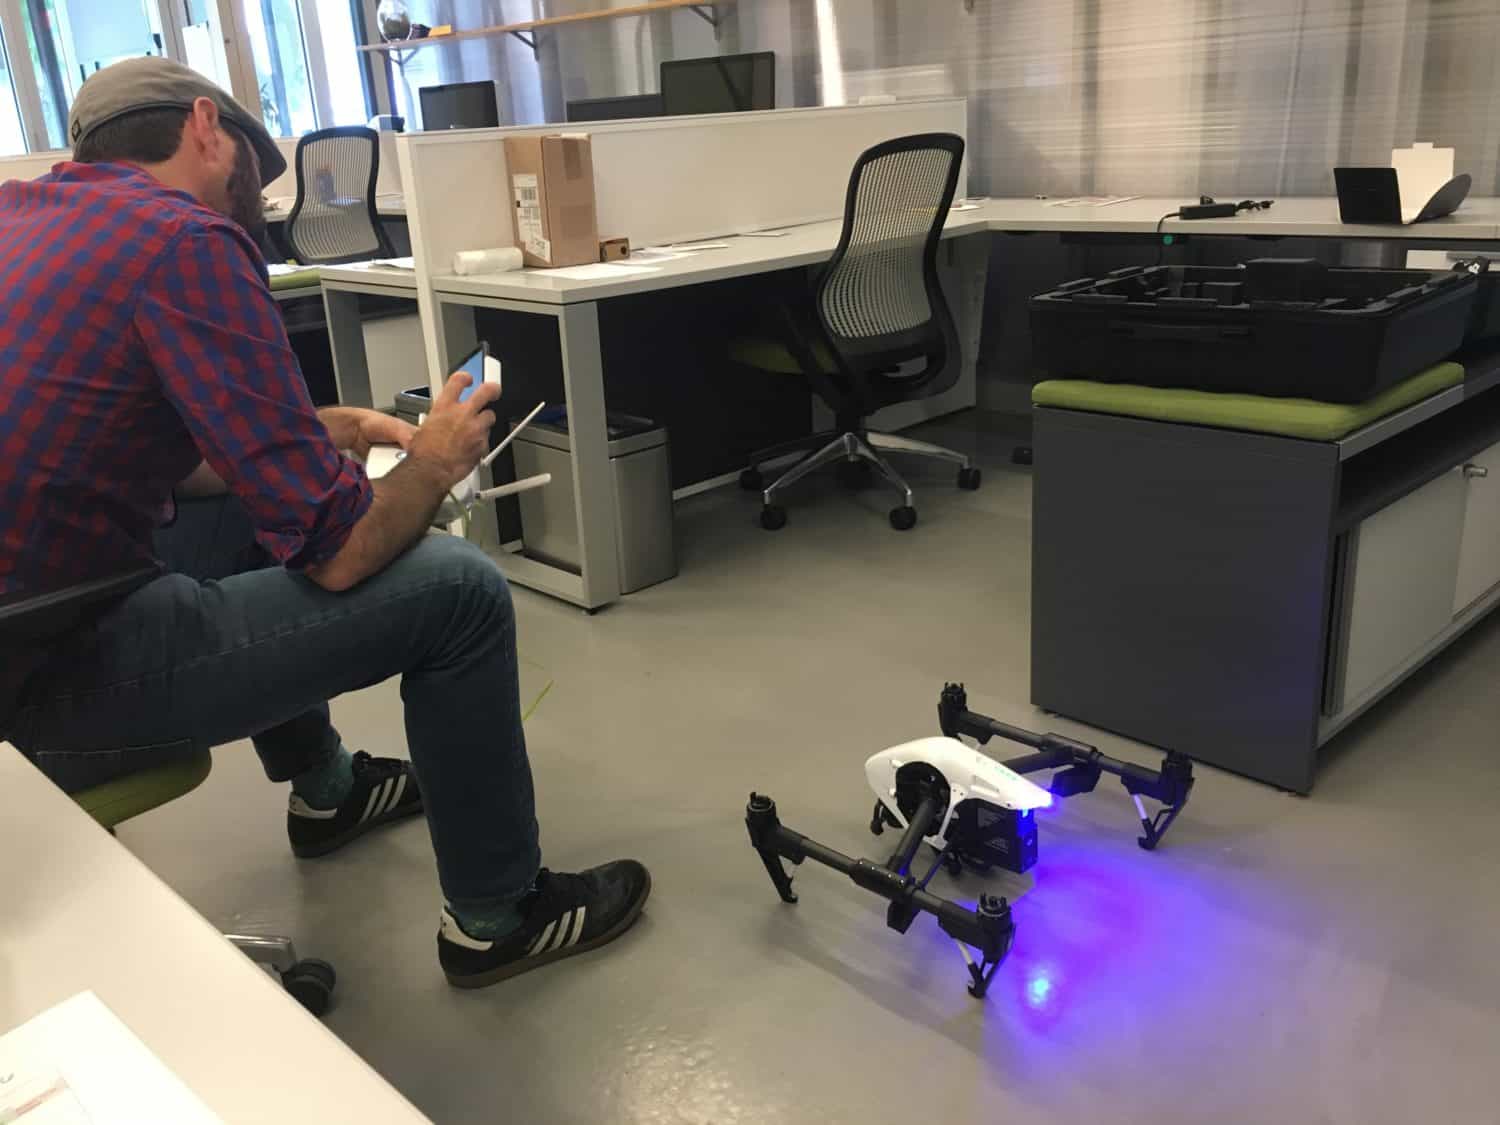 A man in plaid shirt plays with a drone in the Creative Bloc office